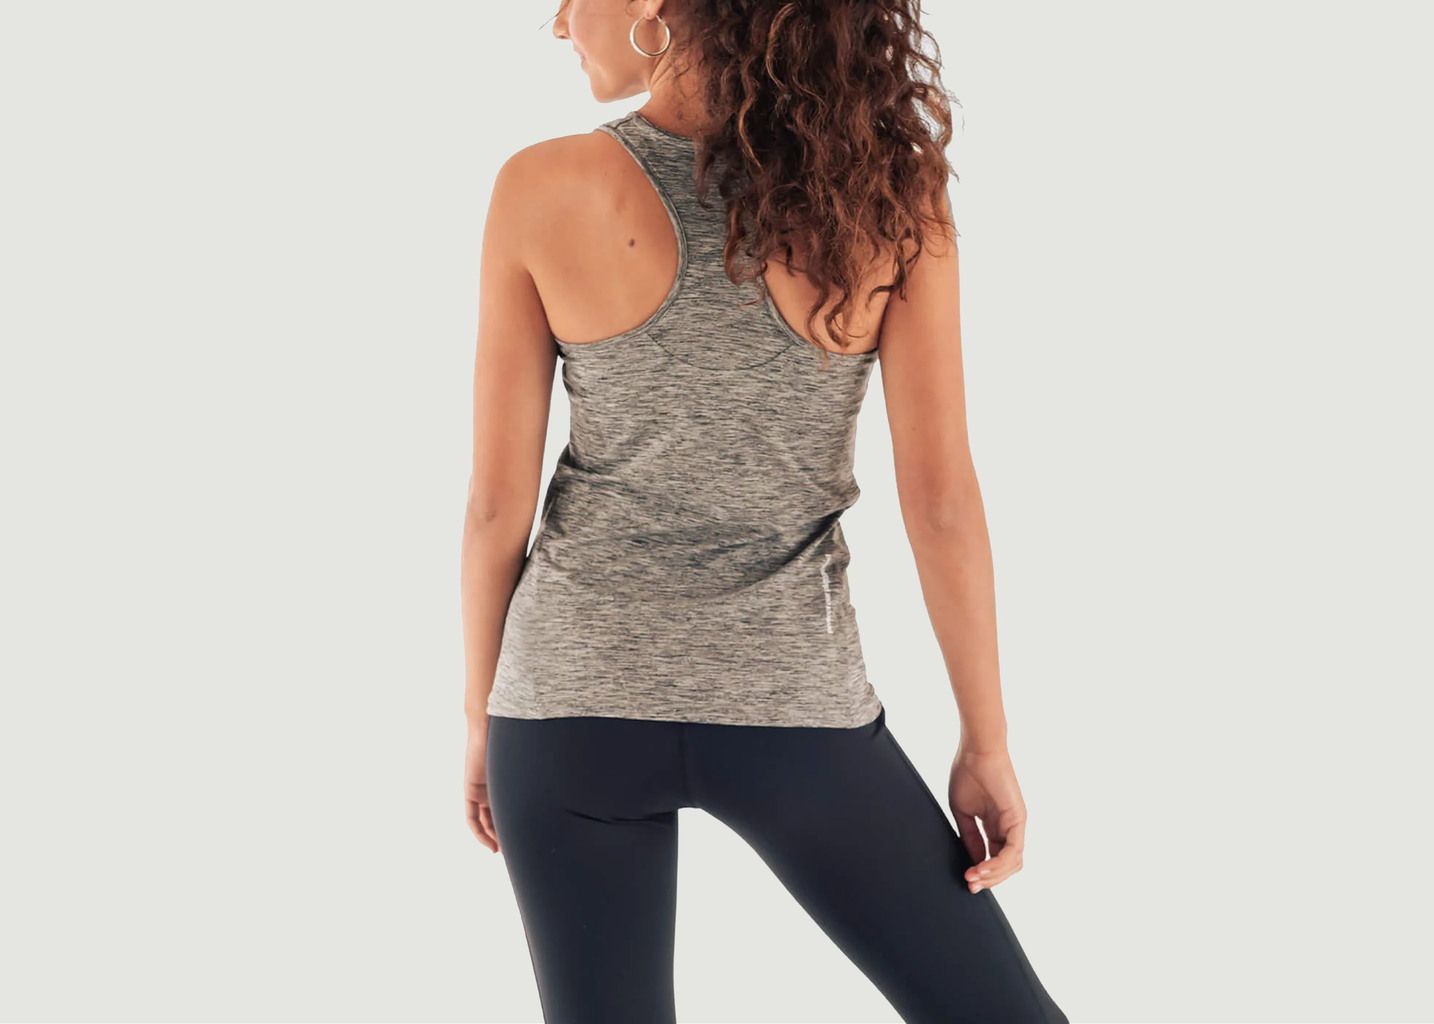 Free Your Mind Quick Dry Sport-Top - Circle Sportswear